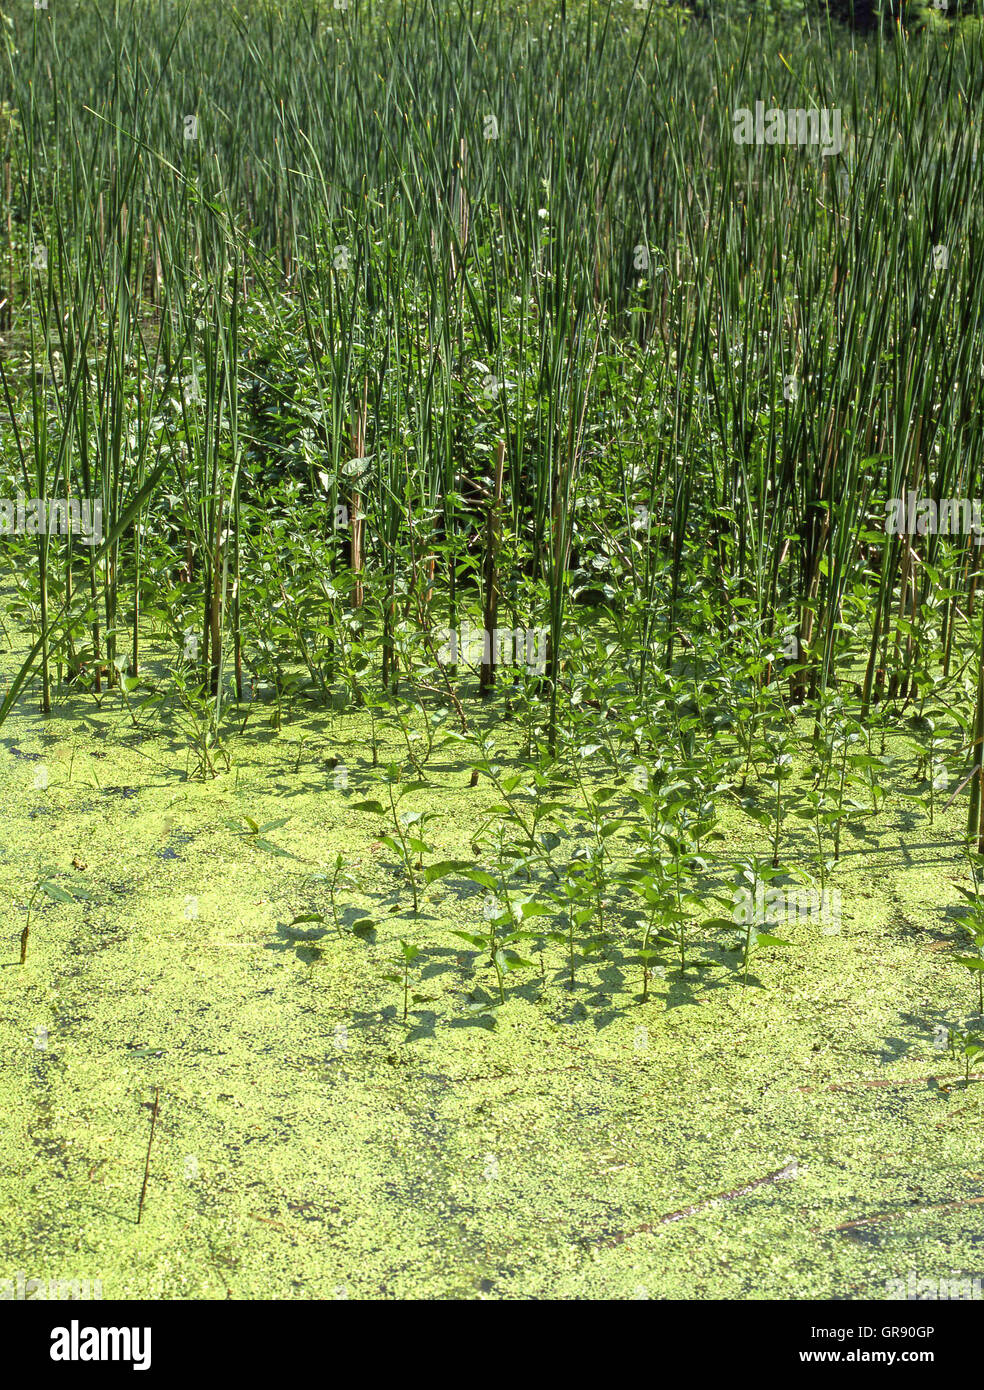 Pond With Reeds And Algae Stock Photo